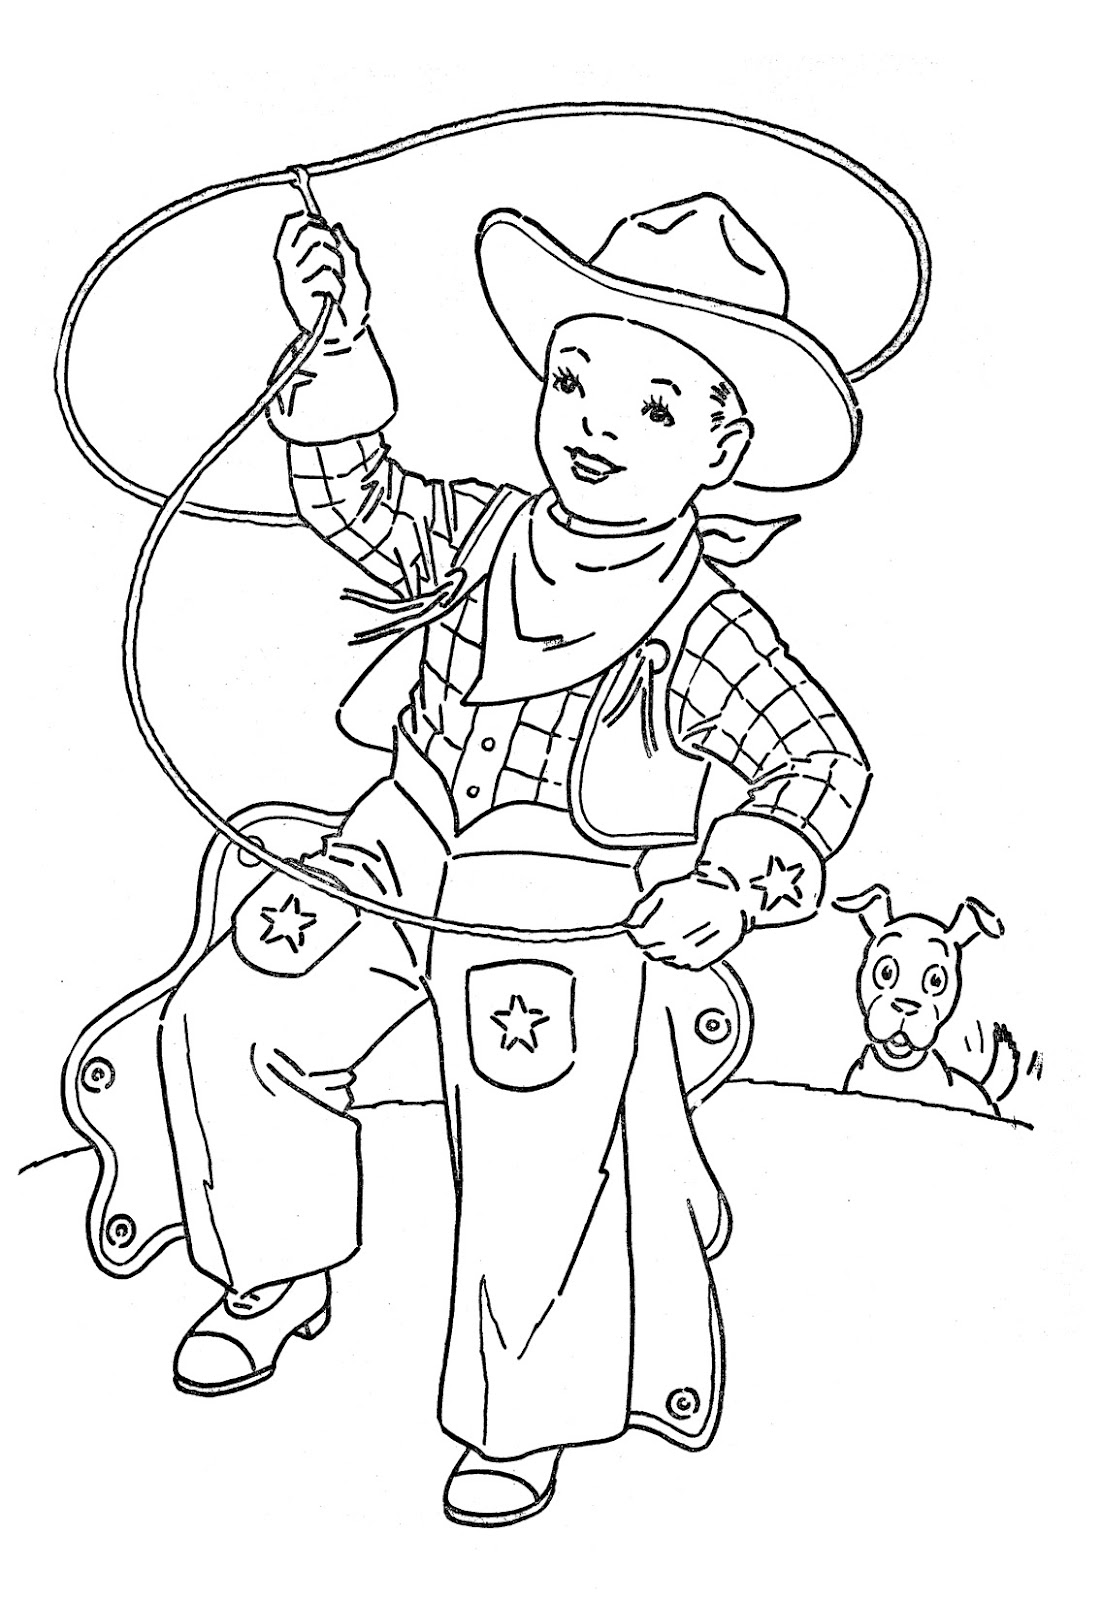 western-theme-coloring-pages-at-getcolorings-free-printable-colorings-pages-to-print-and-color